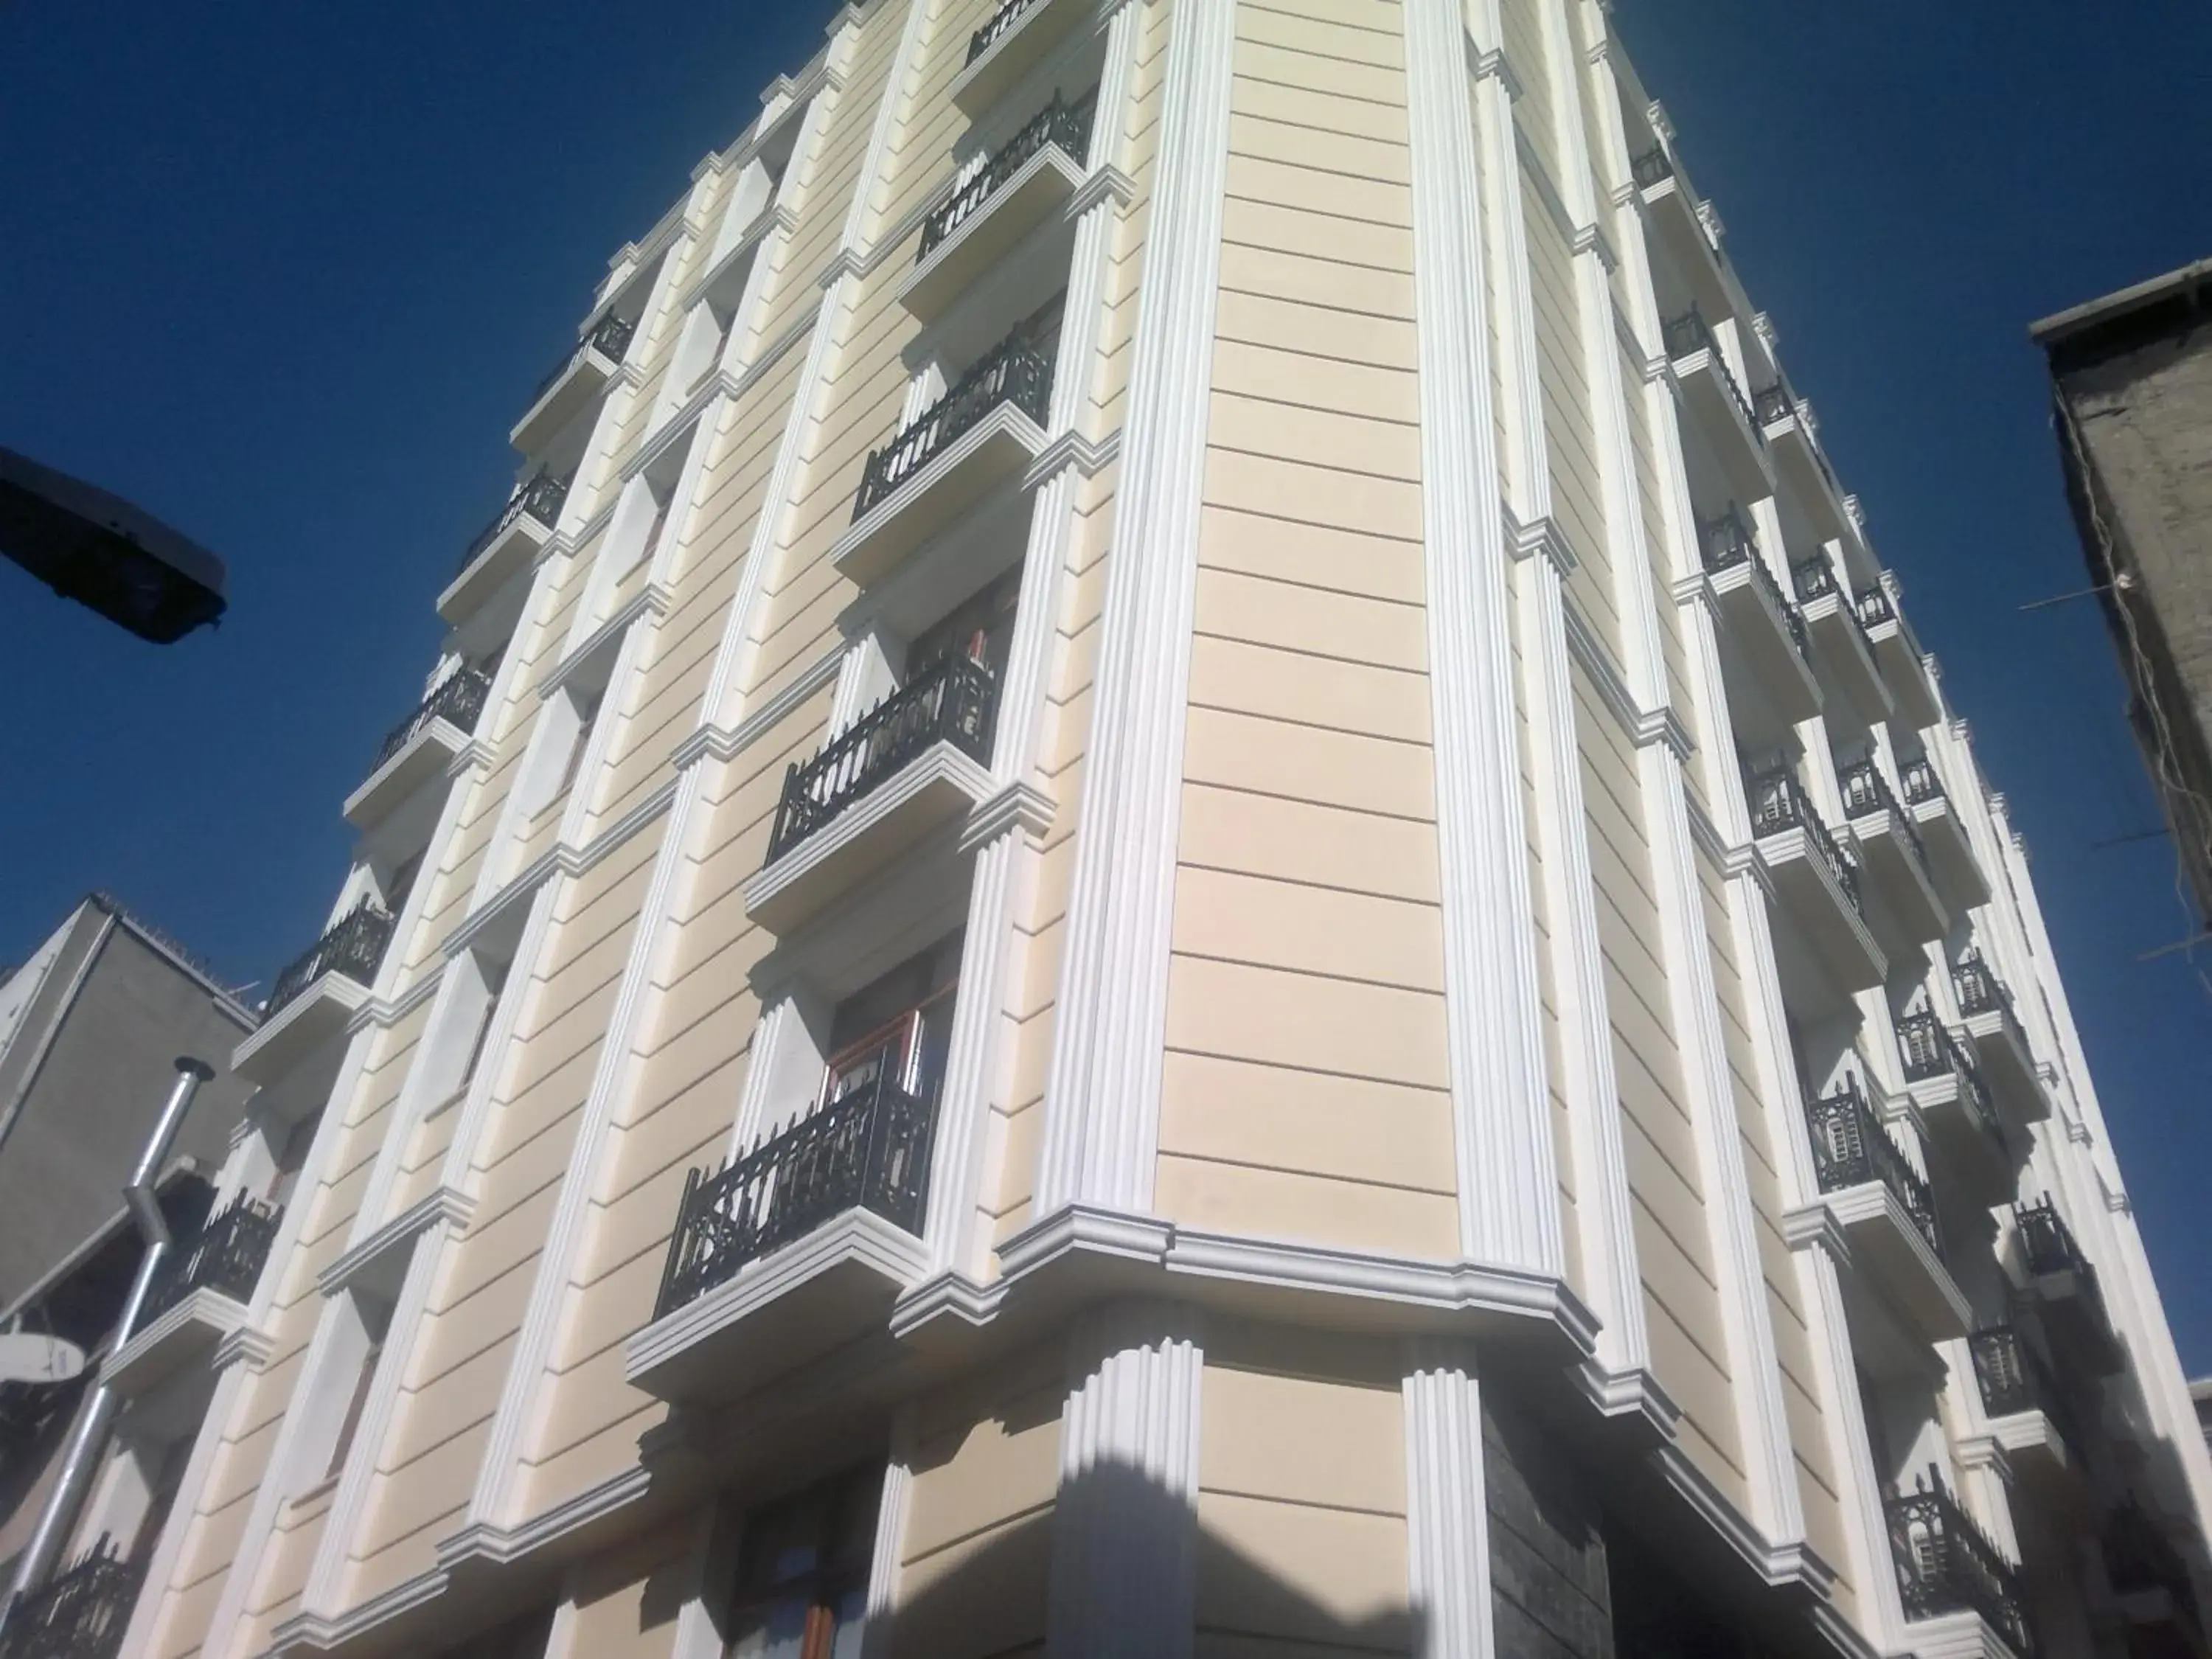 Off site, Property Building in Tayhan Hotel